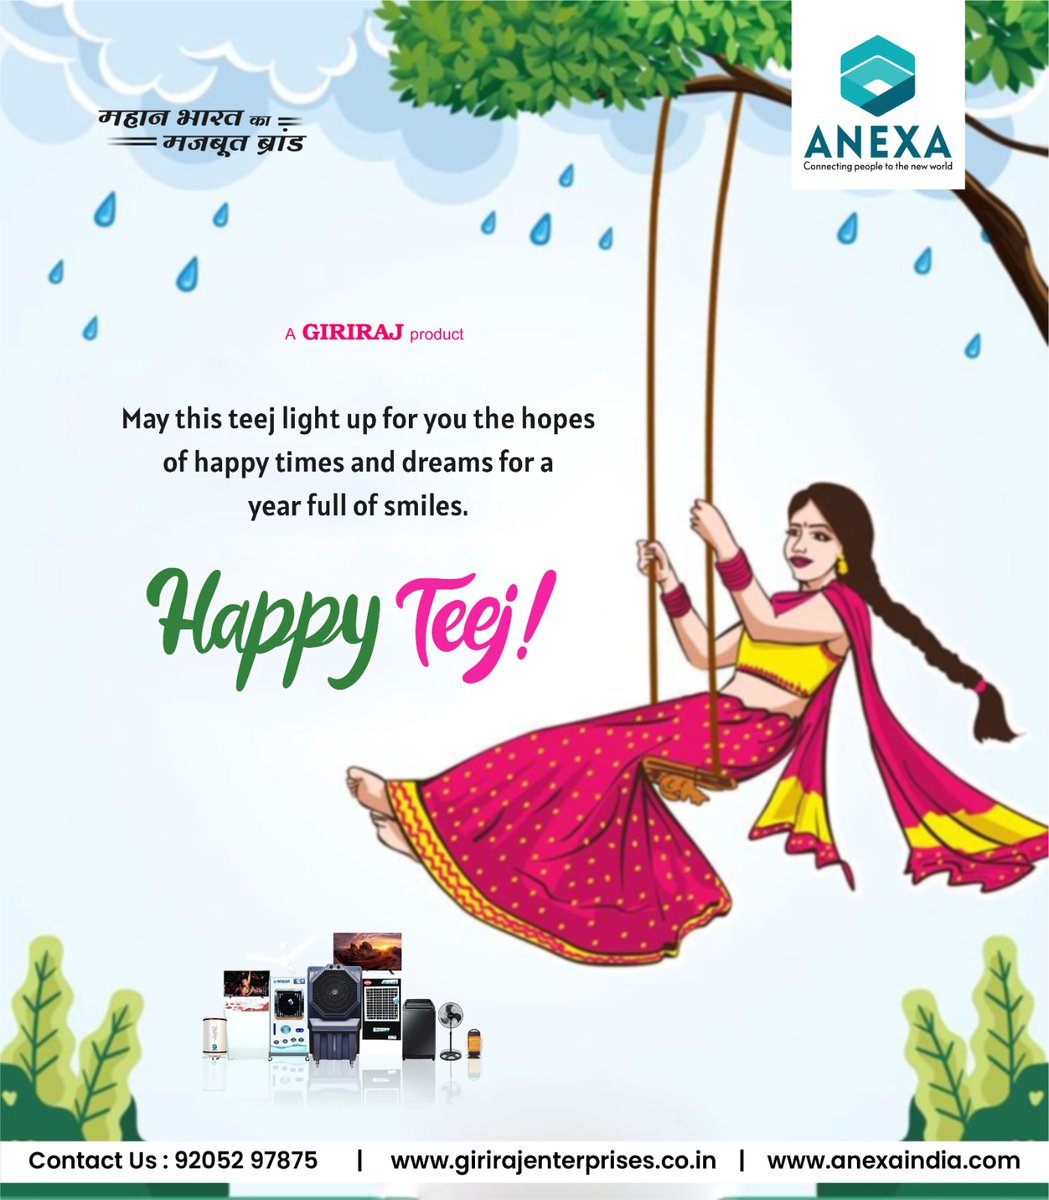 Anexa Wishing you an abundance of joy, love, and prosperity on this special Teej occasion. May your life be as vibrant and beautiful as the festivities of the day! Happy Teej!

#Anexa #AGirirajproduct  #TeejCelebrations #HappyTeej #FestiveVibes #BlessingsAndProsperity…